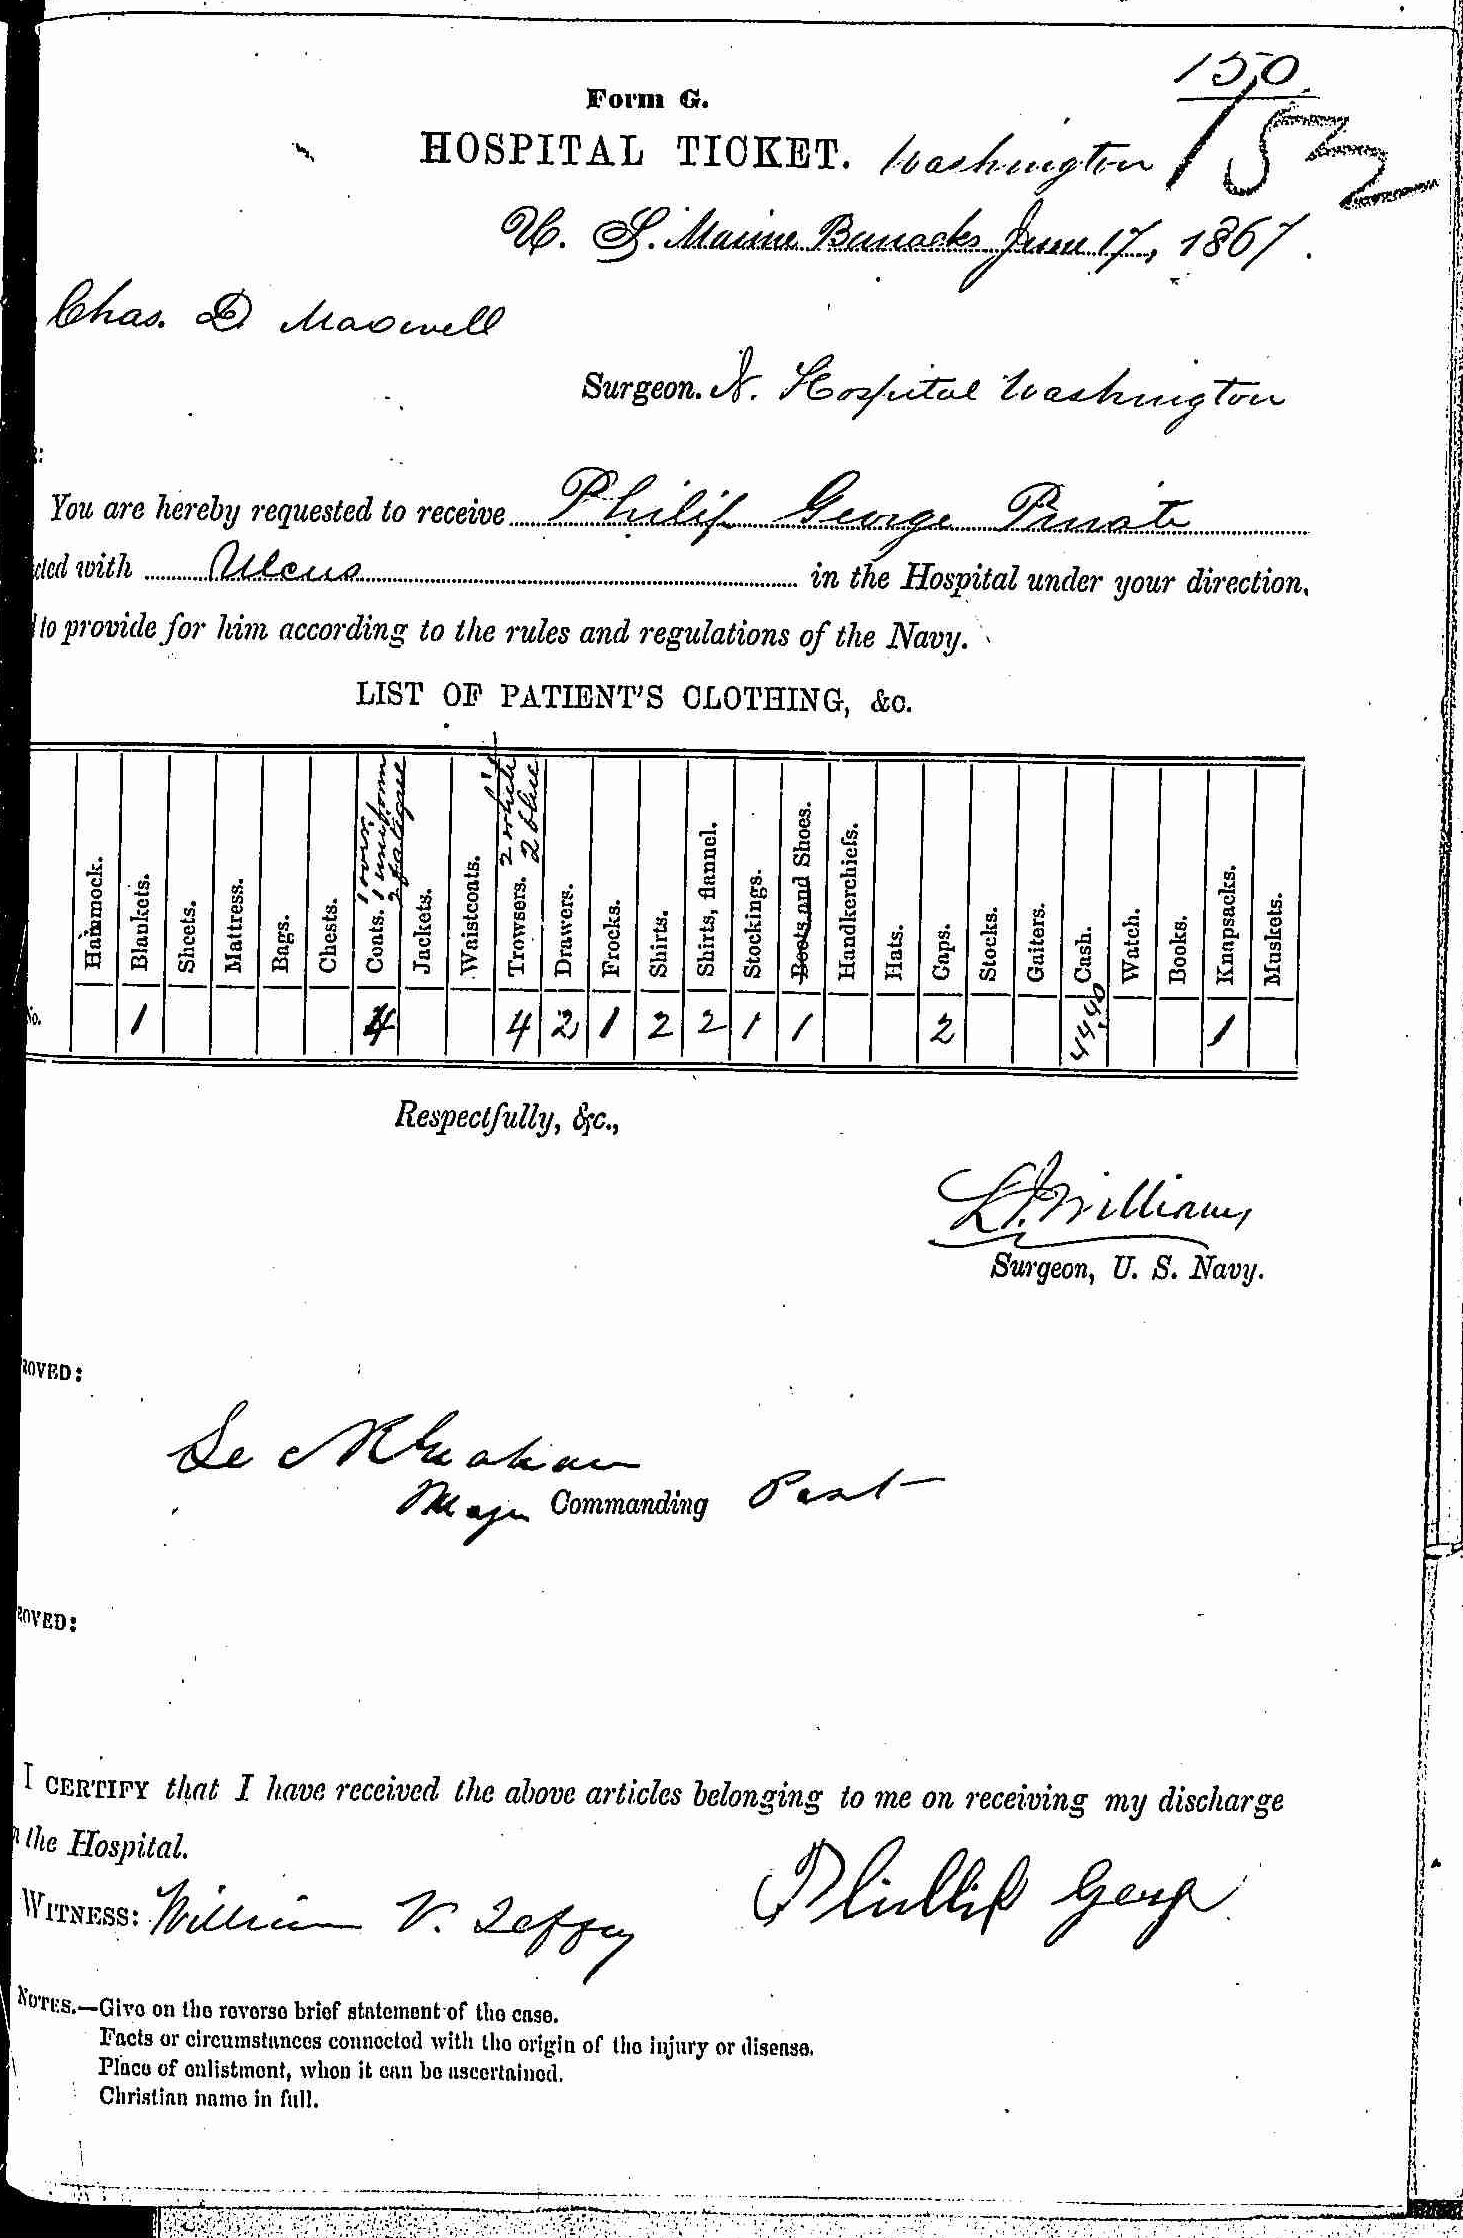 Entry for Philip George (second admission page 1 of 2) in the log Hospital Tickets and Case Papers - Naval Hospital - Washington, D.C. - 1866-68